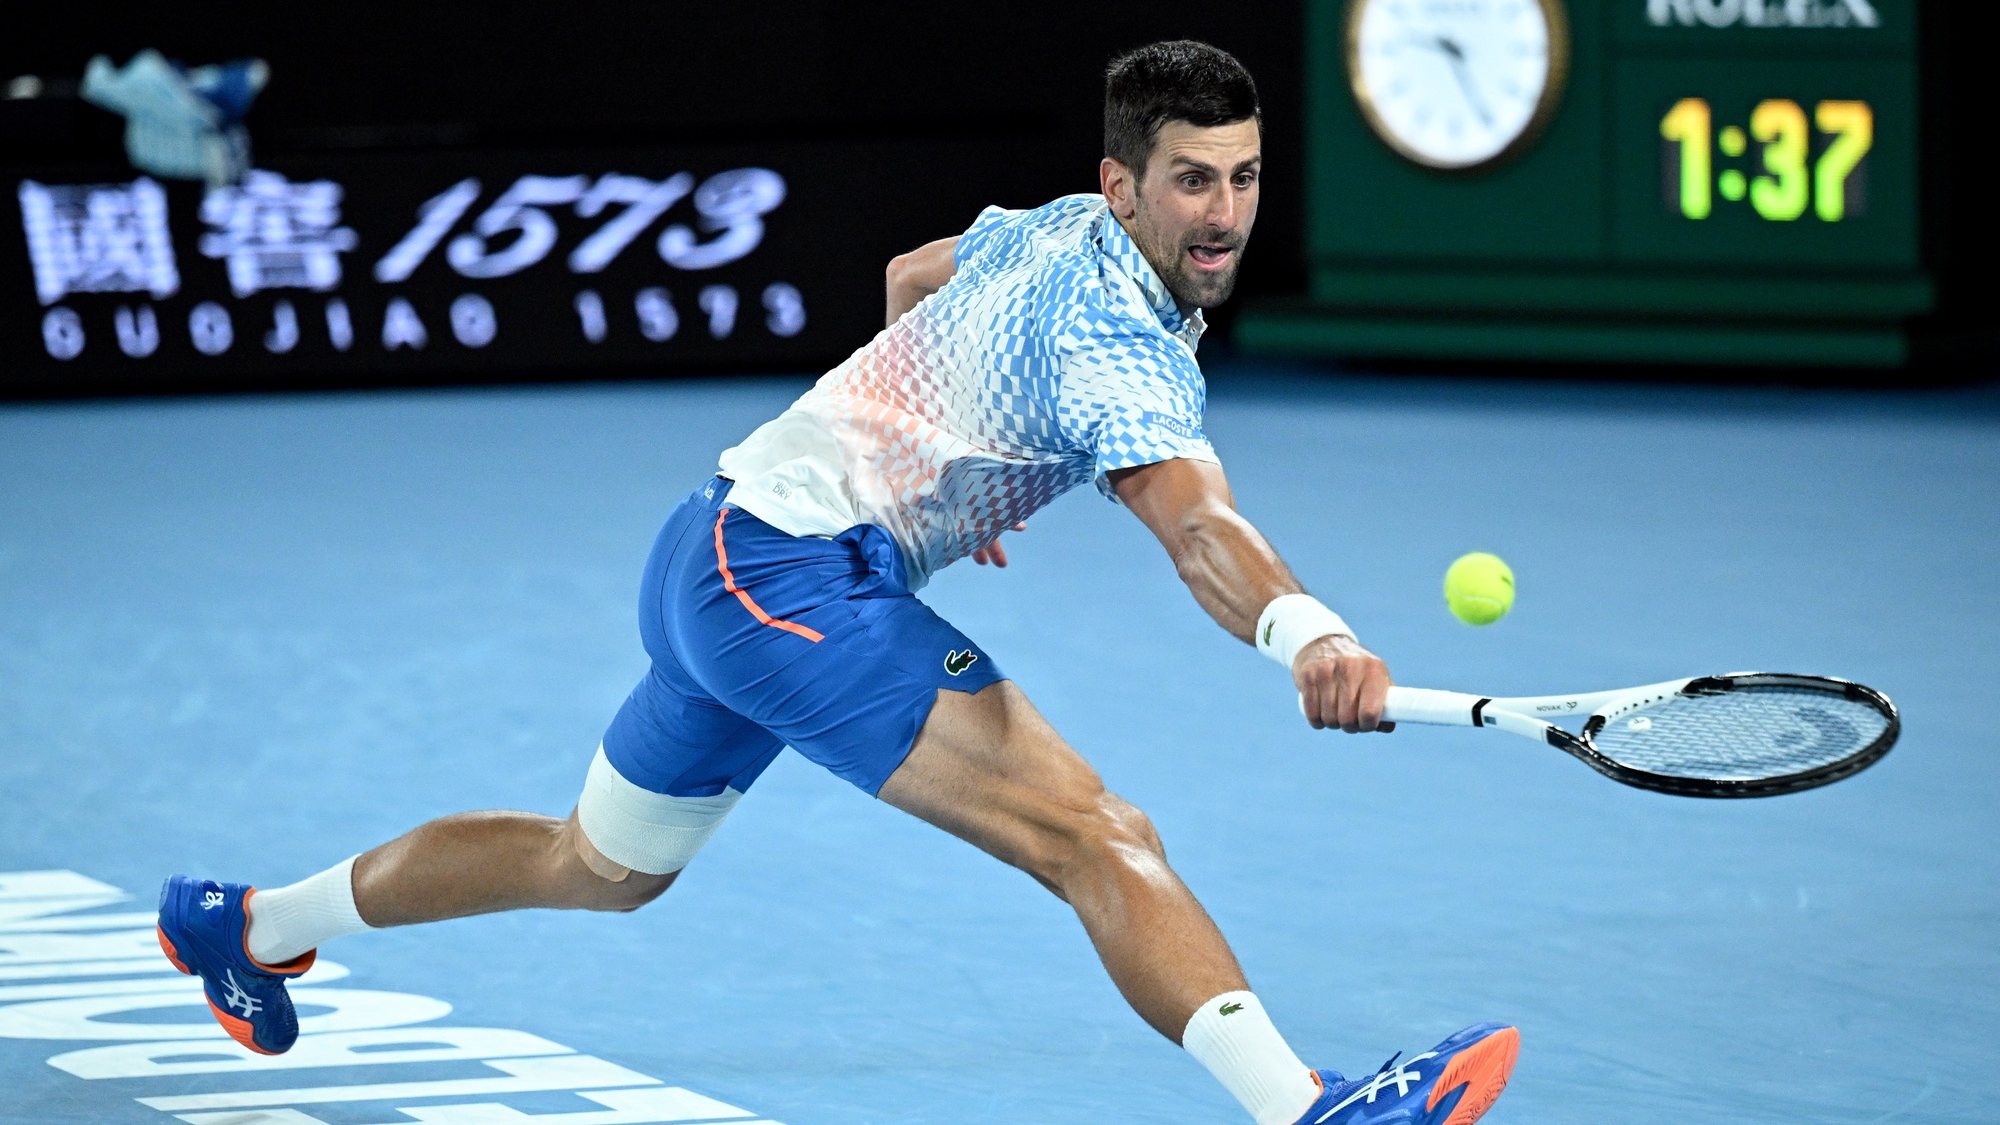 epa10428268 Novak Djokovic of Serbia in action during his quarterfinal match against Andrey Rublev  of Russia at the 2023 Australian Open tennis tournament in Melbourne, Australia, 25 January 2023.  EPA/JAMES ROSS AUSTRALIA AND NEW ZEALAND OUT